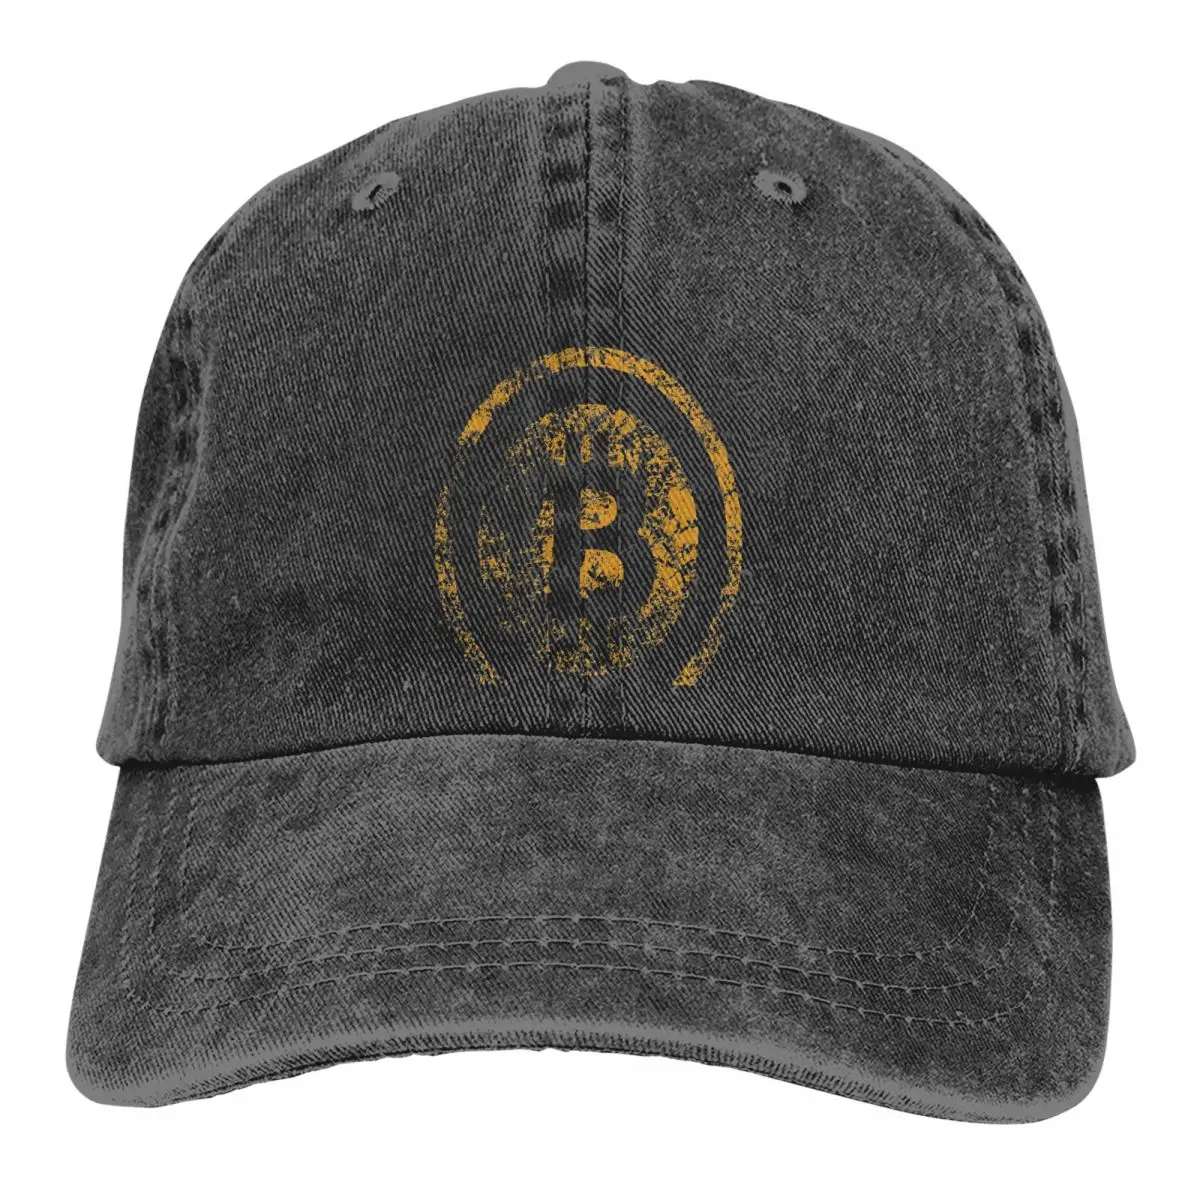 Cryptocurrency Miners Multicolor Hat Peaked Women's Cap Vintage Bitcoin Personalized Visor Protection Hats